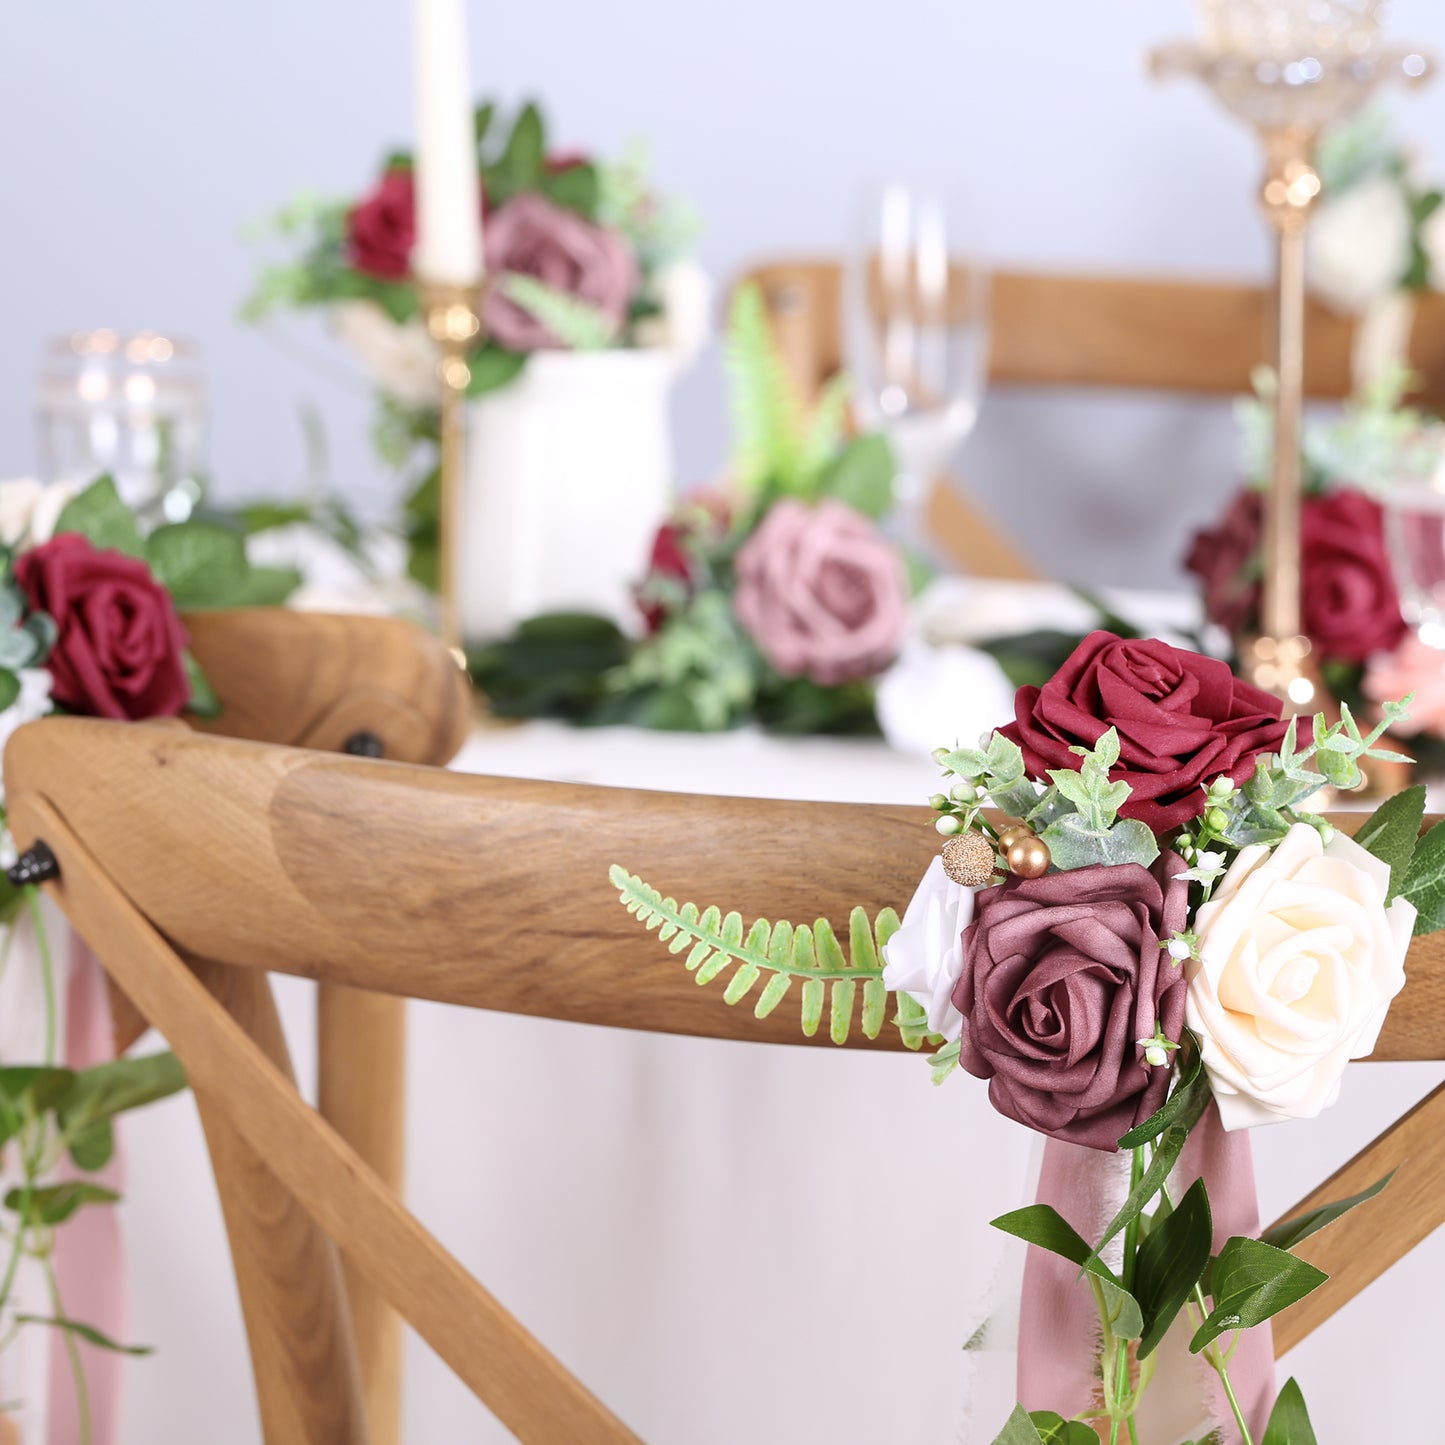 Wedding Aisle Decorations Mauve Burgundy Pew Flowers Set of 10 for Wedding Ceremony Party Chair Decor with Artificial Flowers Eucalyptus and Ribbons